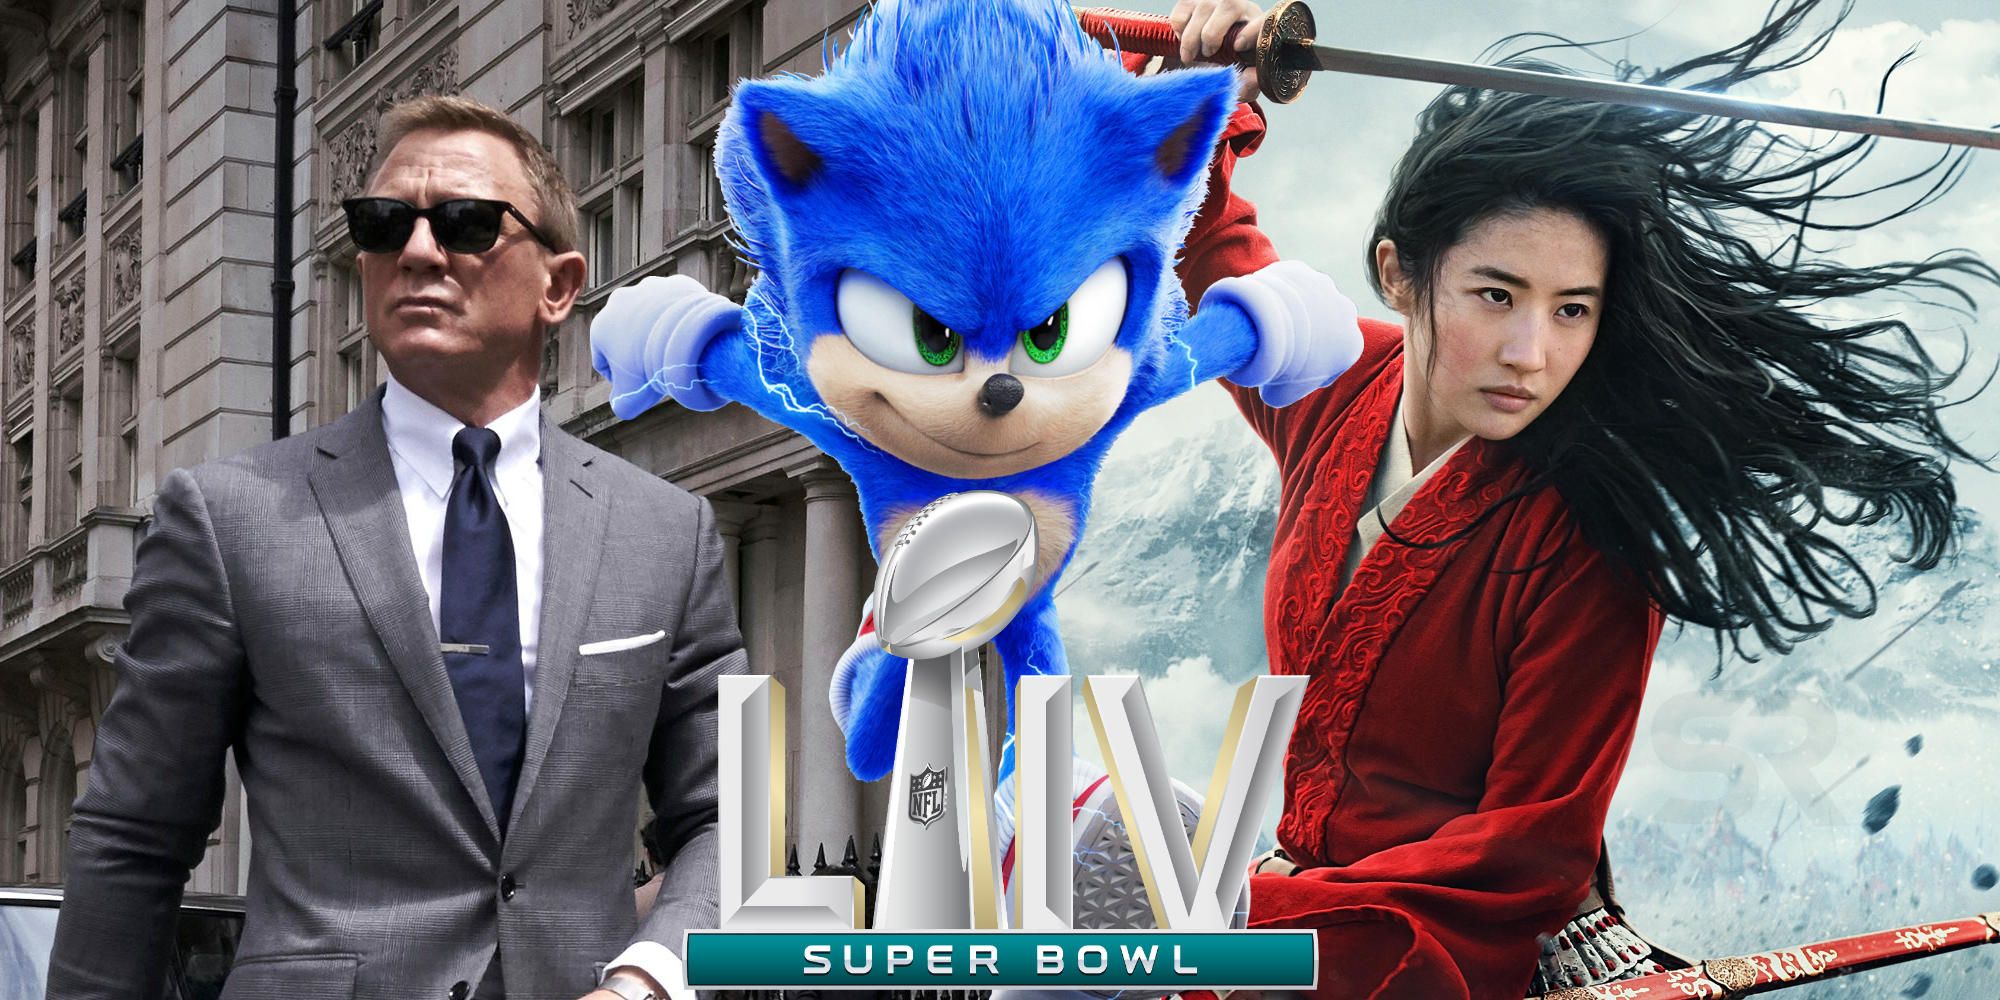 Super Bowl 2020 Movie & TV Trailers Prediction: What To Expect2000 x 1000